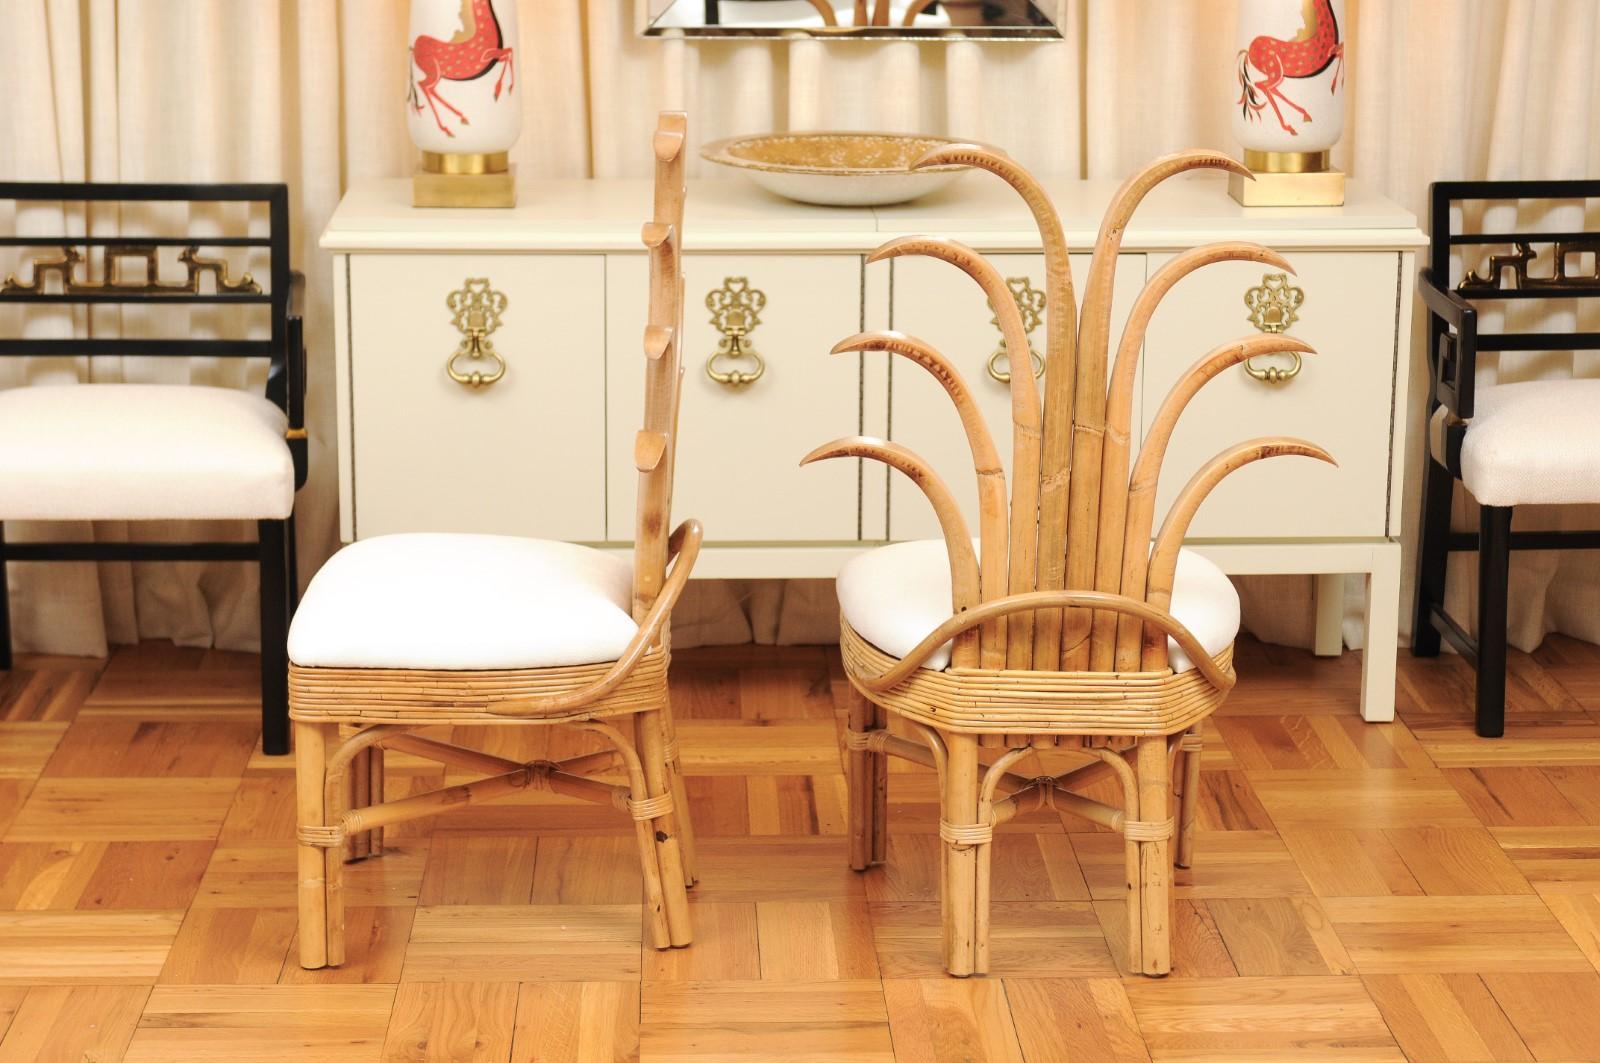 Exquisite Set of 8 Rattan and Cane Palm Frond Dining Chairs, circa 1950 For Sale 3